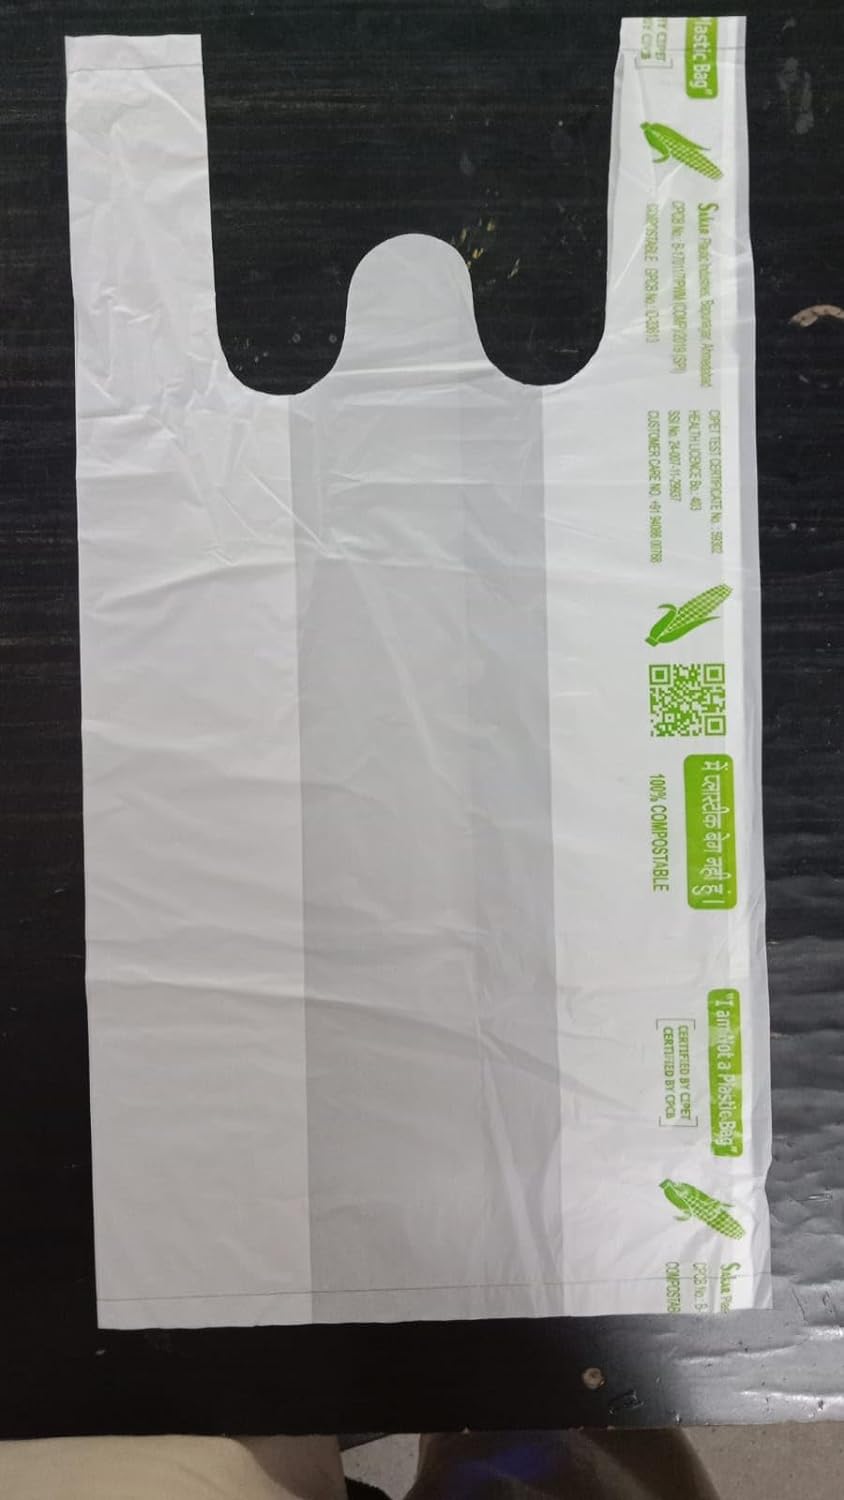 Biodegradable & Compostable Certified Eco-Friendly Grocery Bags Length 16 inch Breadth is 8 inch (16x20 Inch, 100)